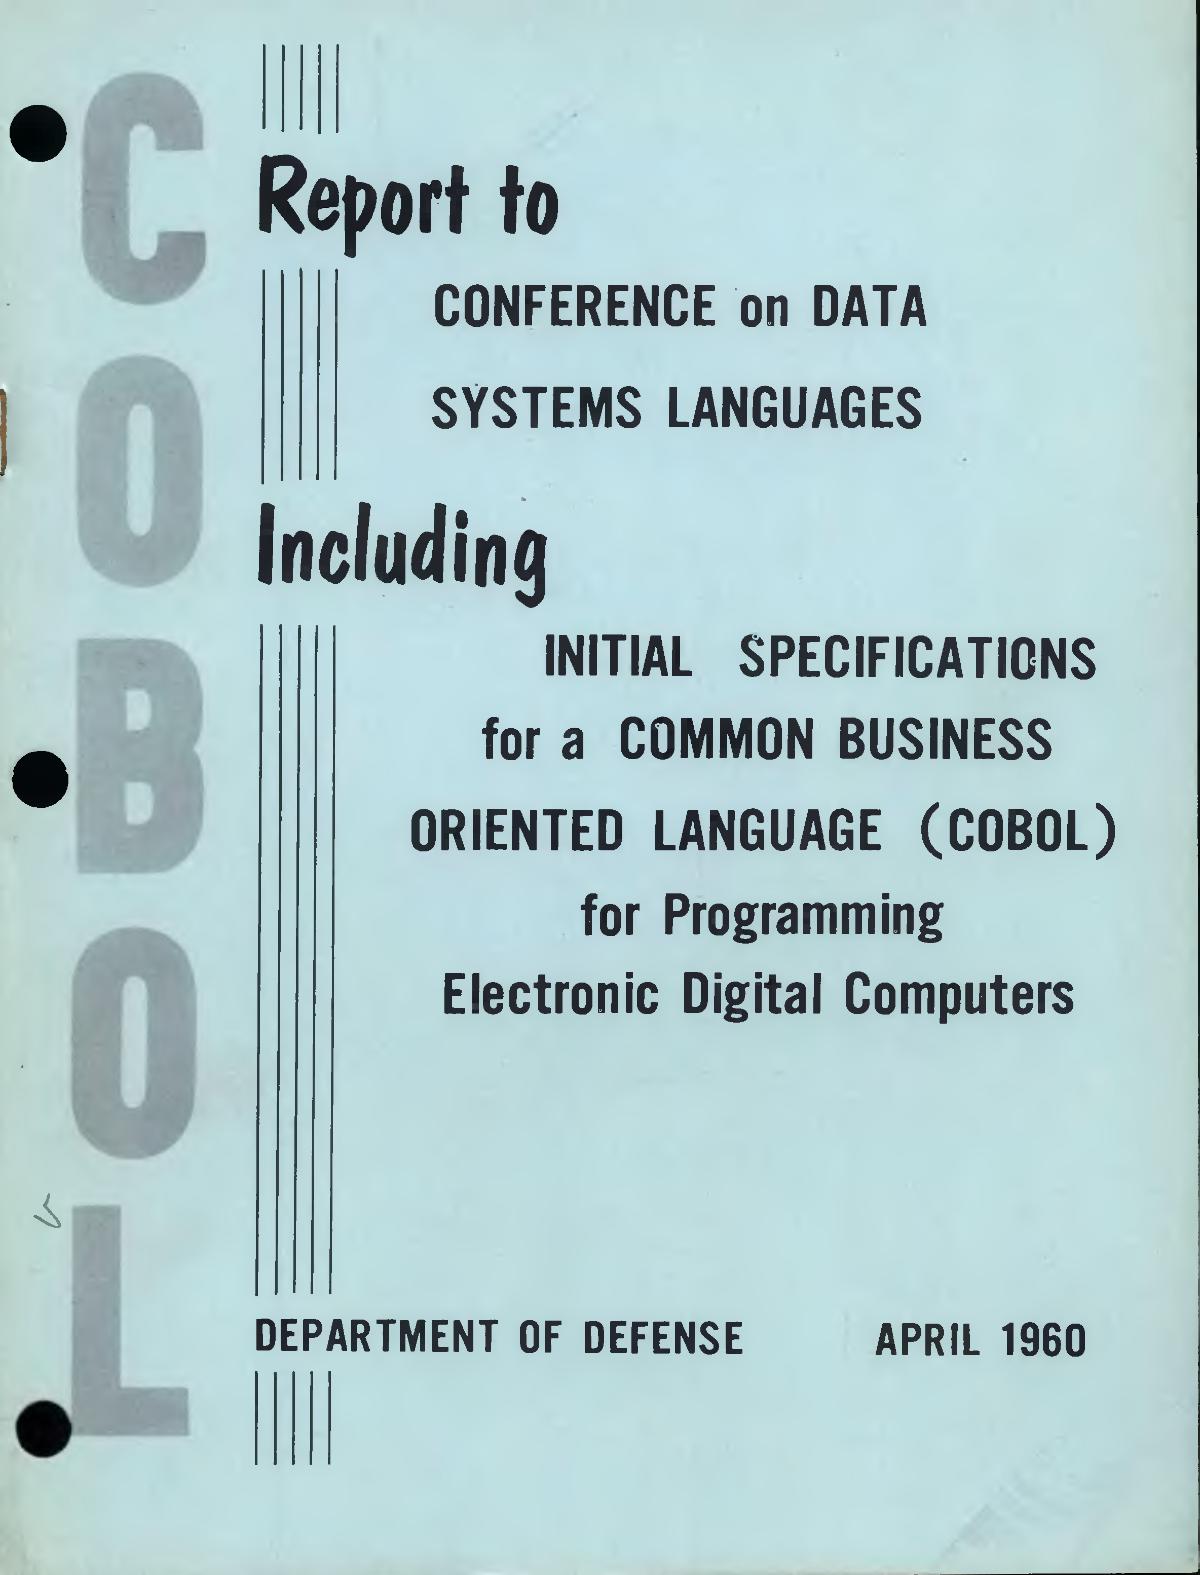 Scan of a cover titled, Report to Conference on Data Systems Languages Including Initial Specifications for a Common Business Oriented Language (COBOL) for Programming Electronic Digital Computers, Department of Defense, April 1960